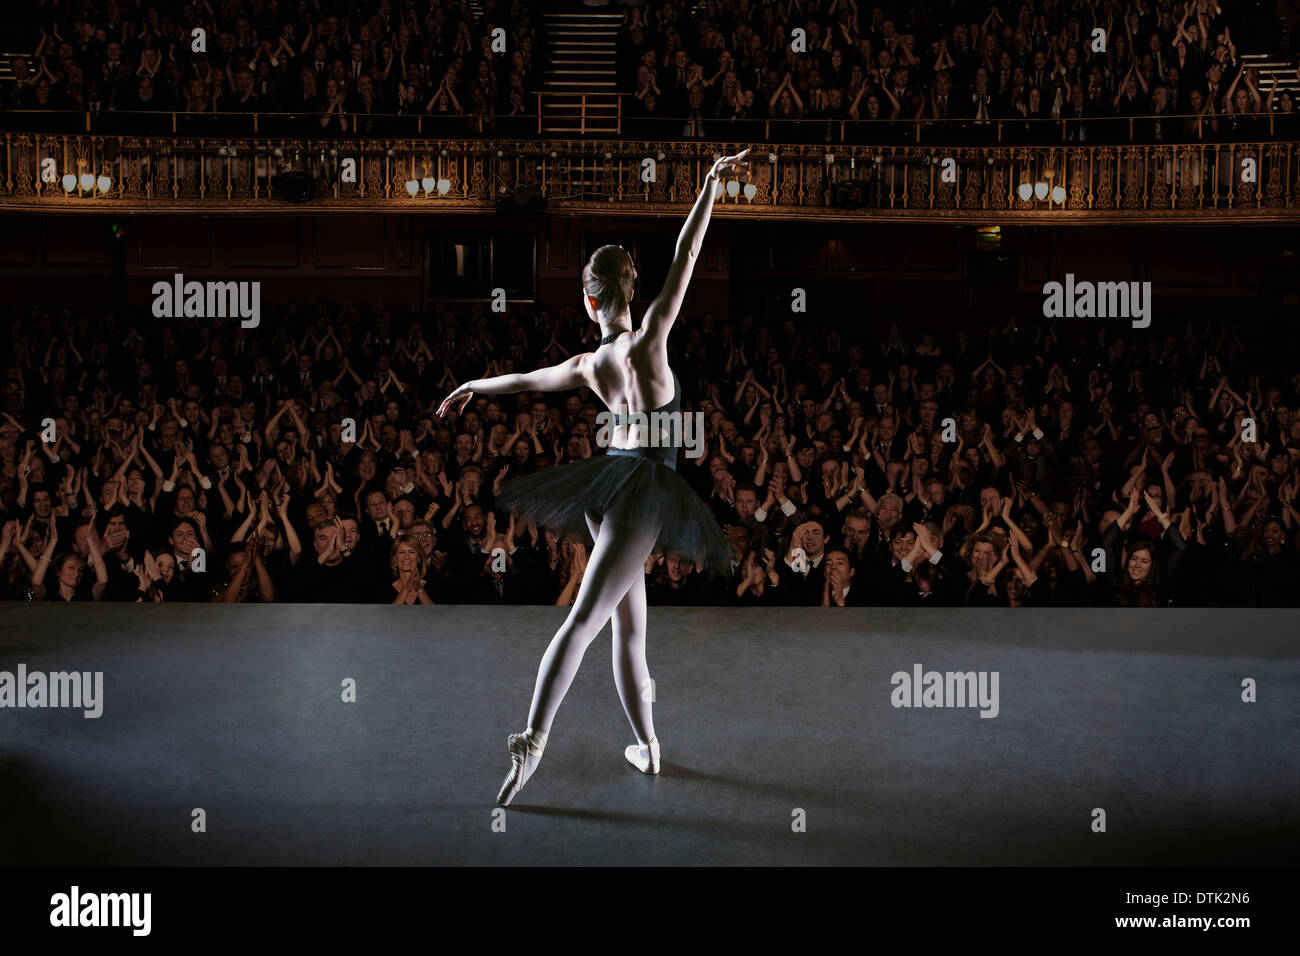 Ballerina performing on stage in theater Stock Photo - Alamy